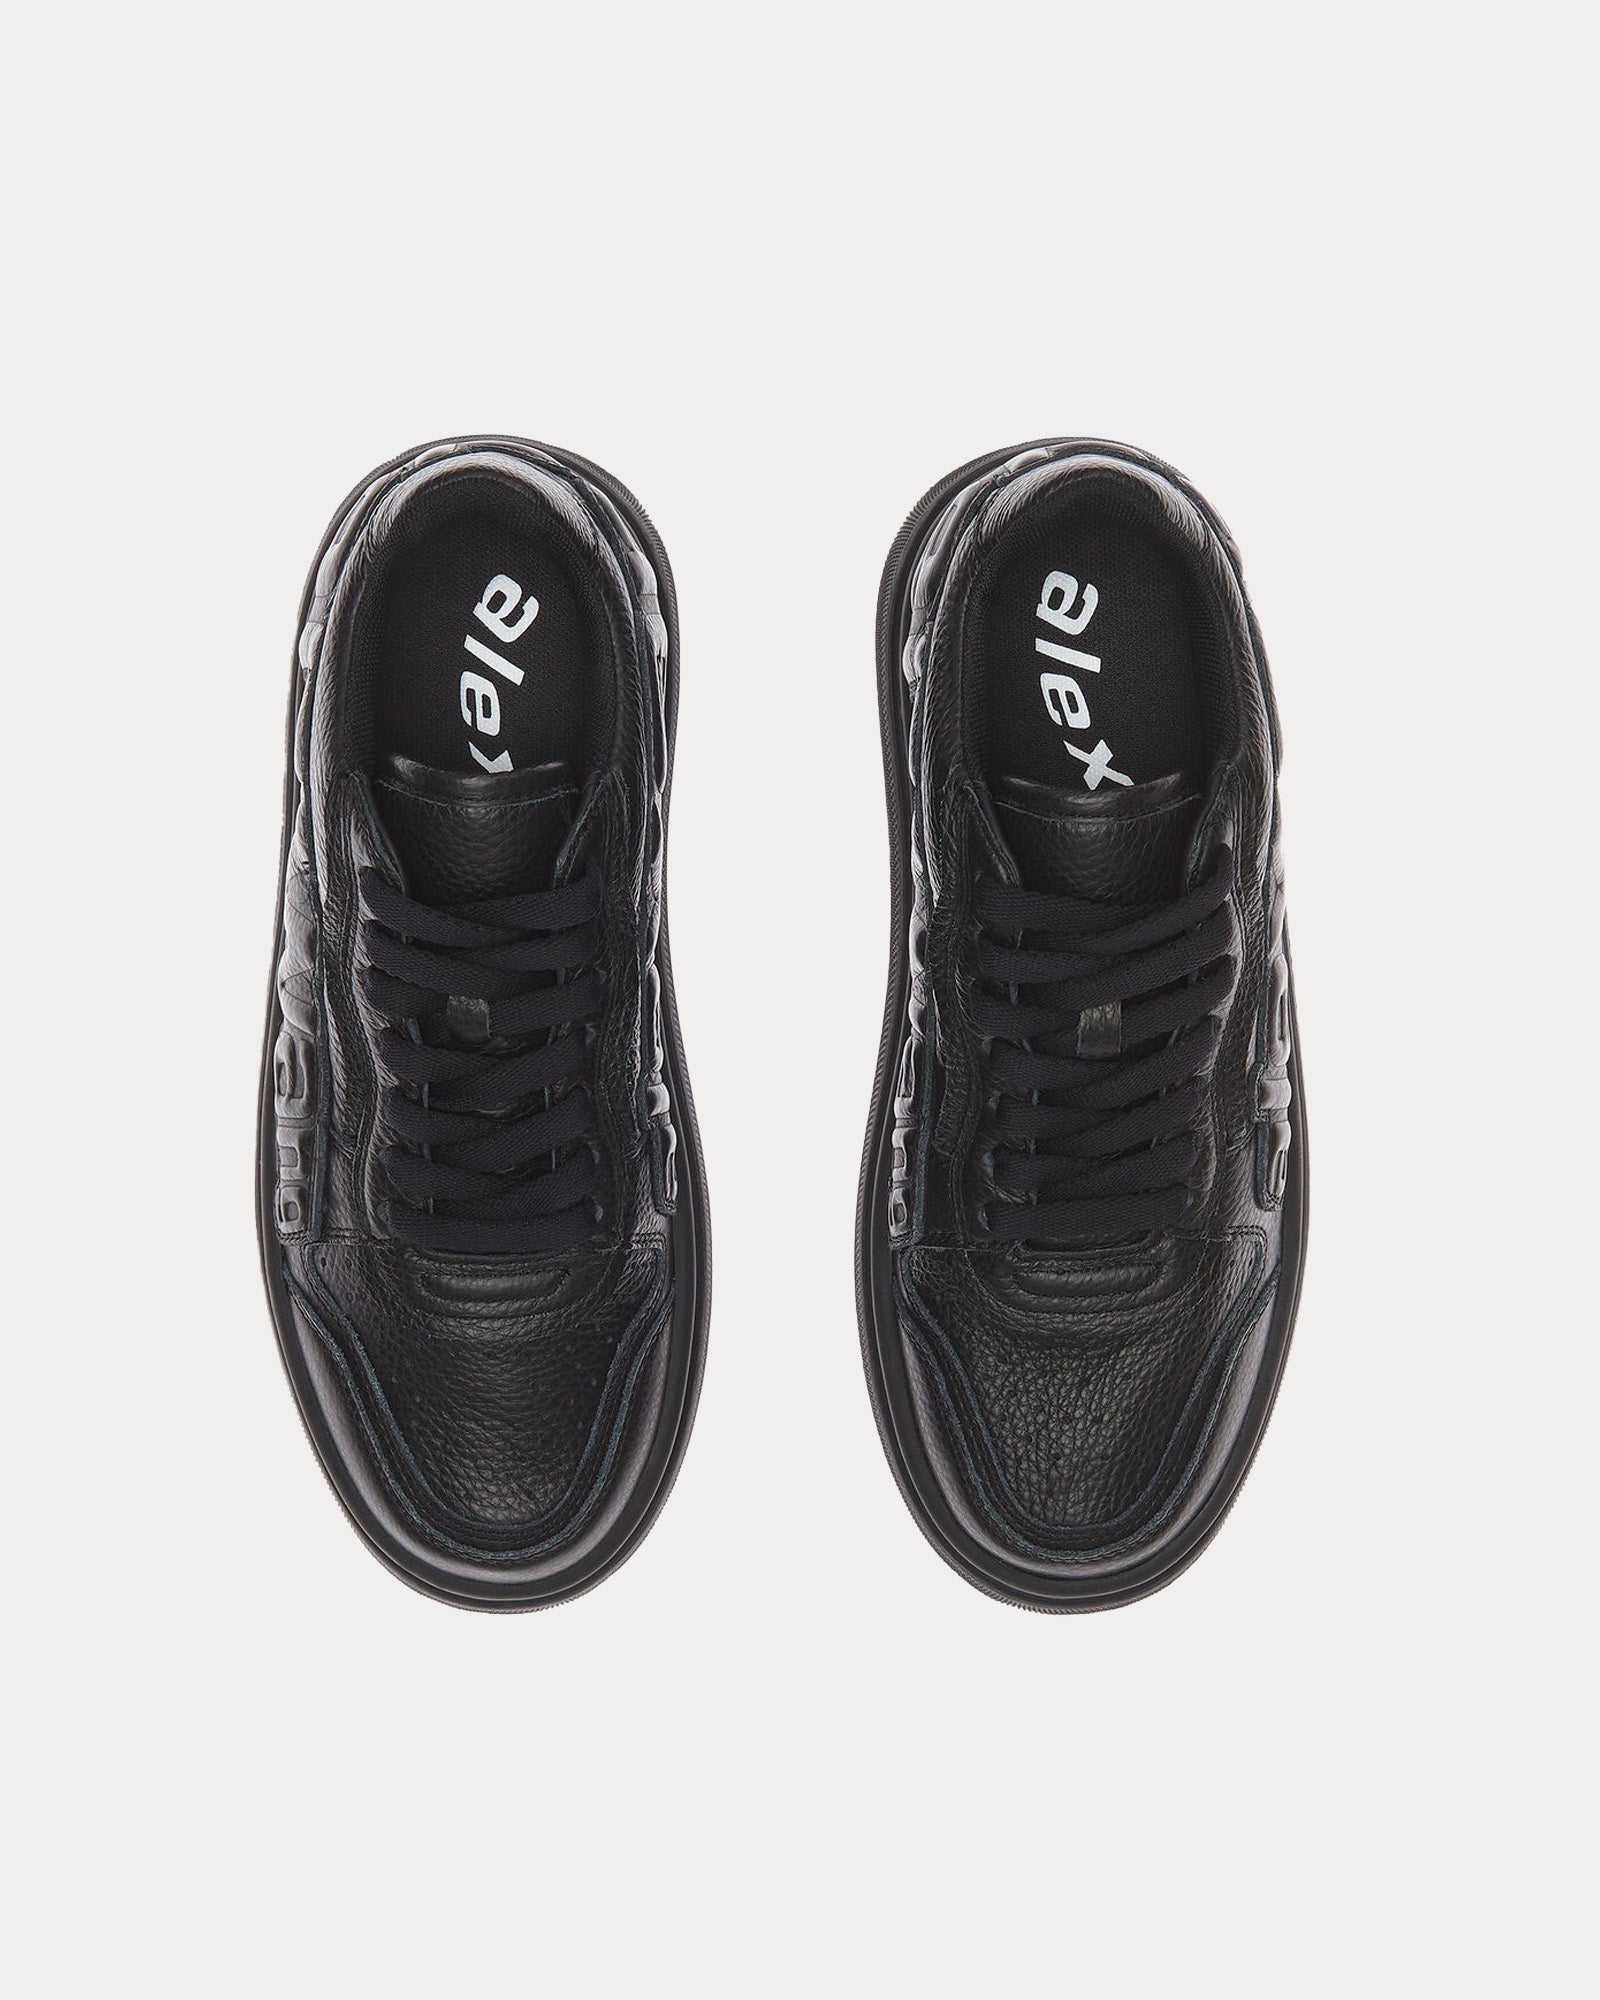 Alexander Wang - Puff Pebble Leather with Logo Black Low Top Sneakers